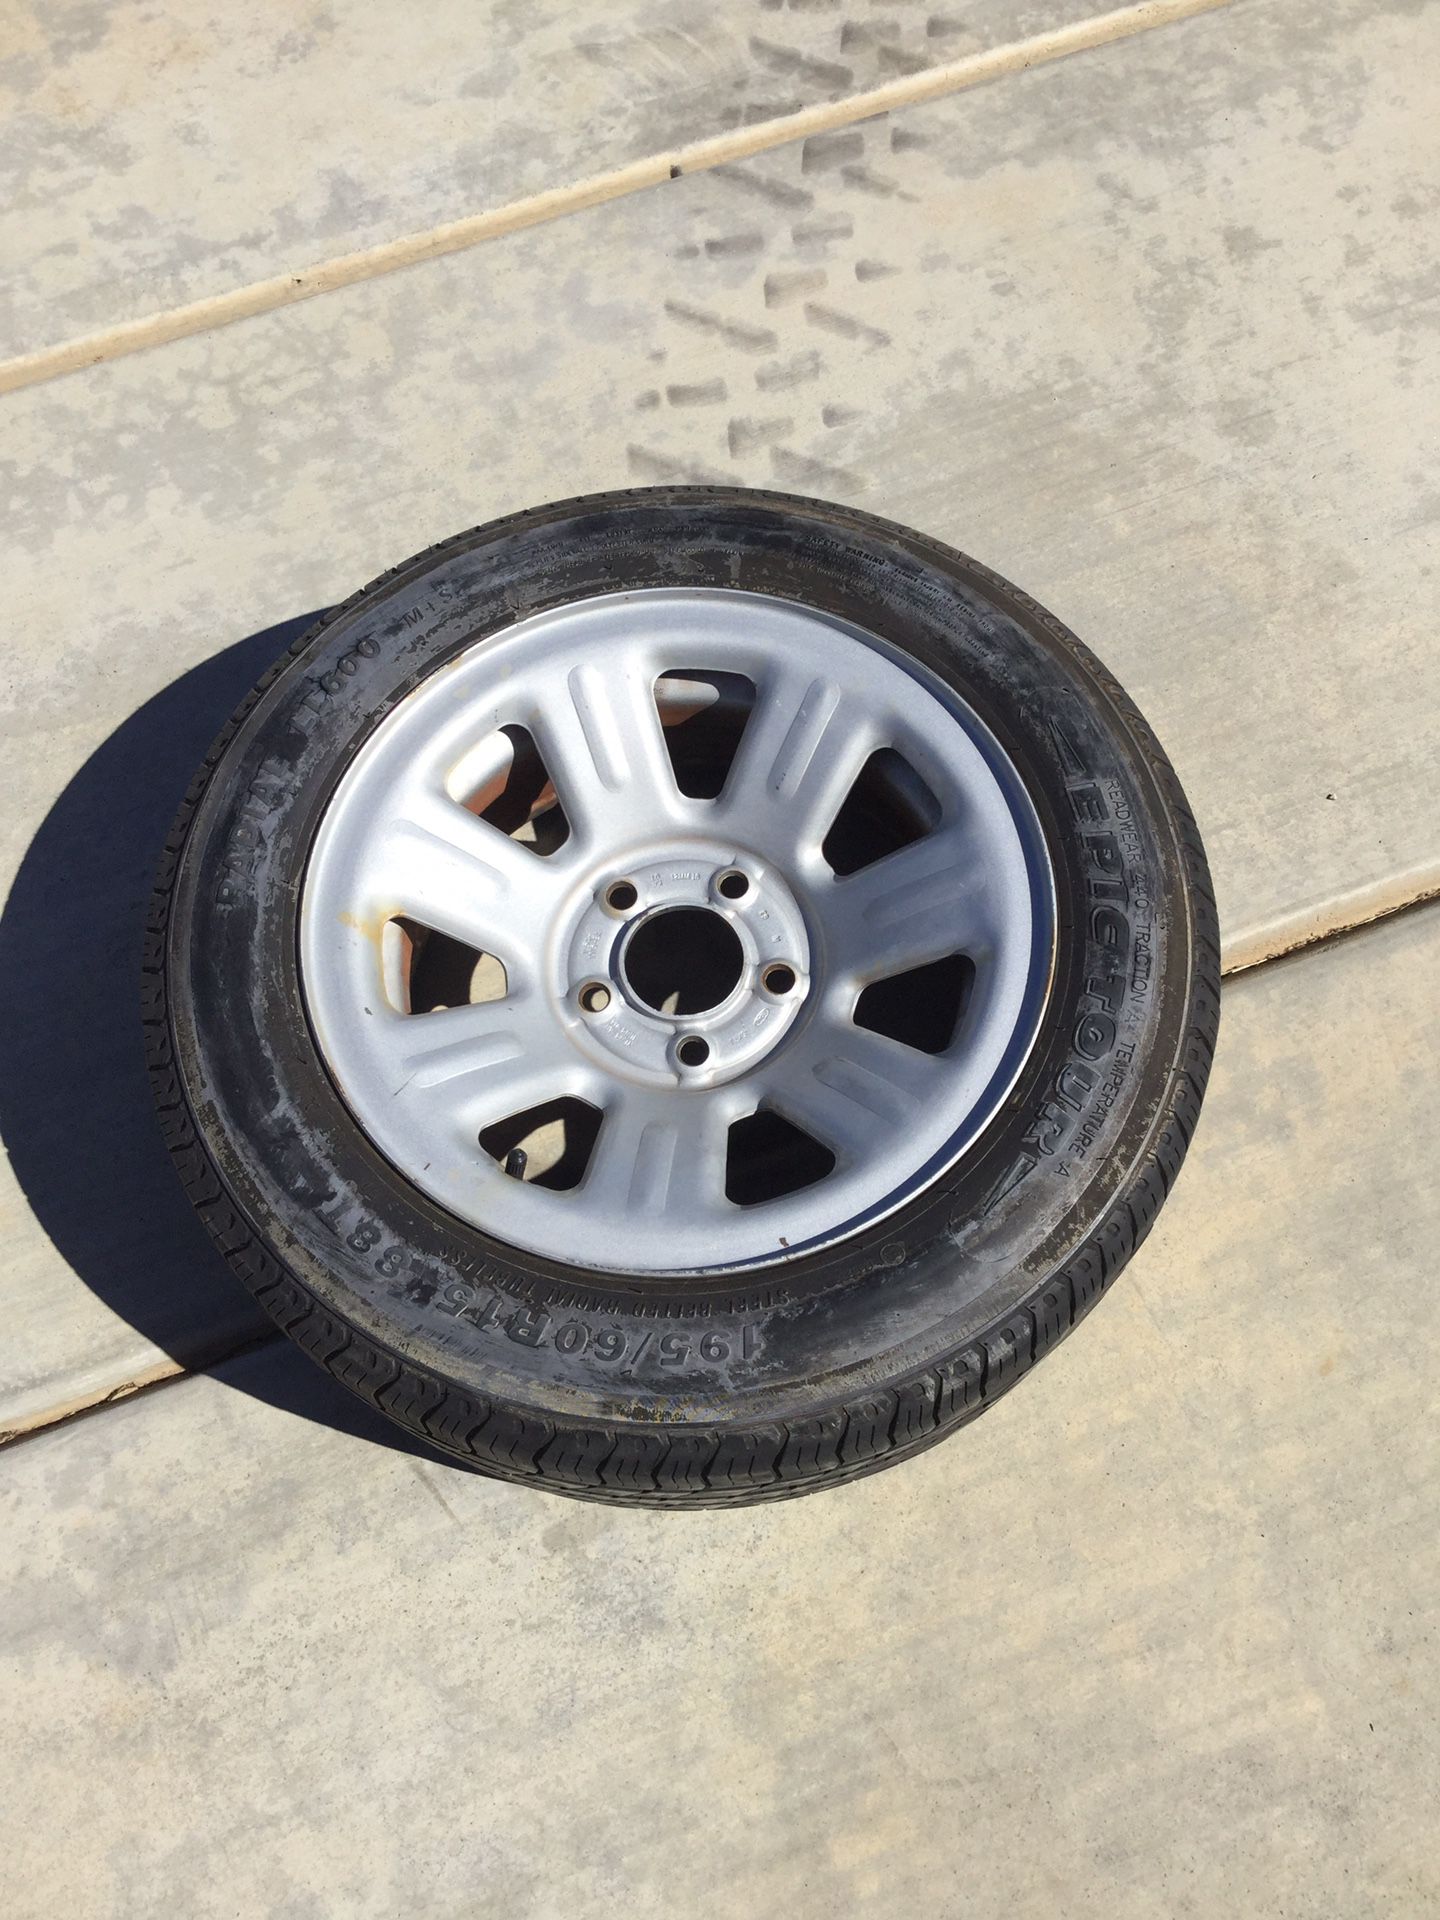 Trailer Tire and Rim 195/60 R15 2 inches between lugs FREE CANT GET ANY CHEAPER